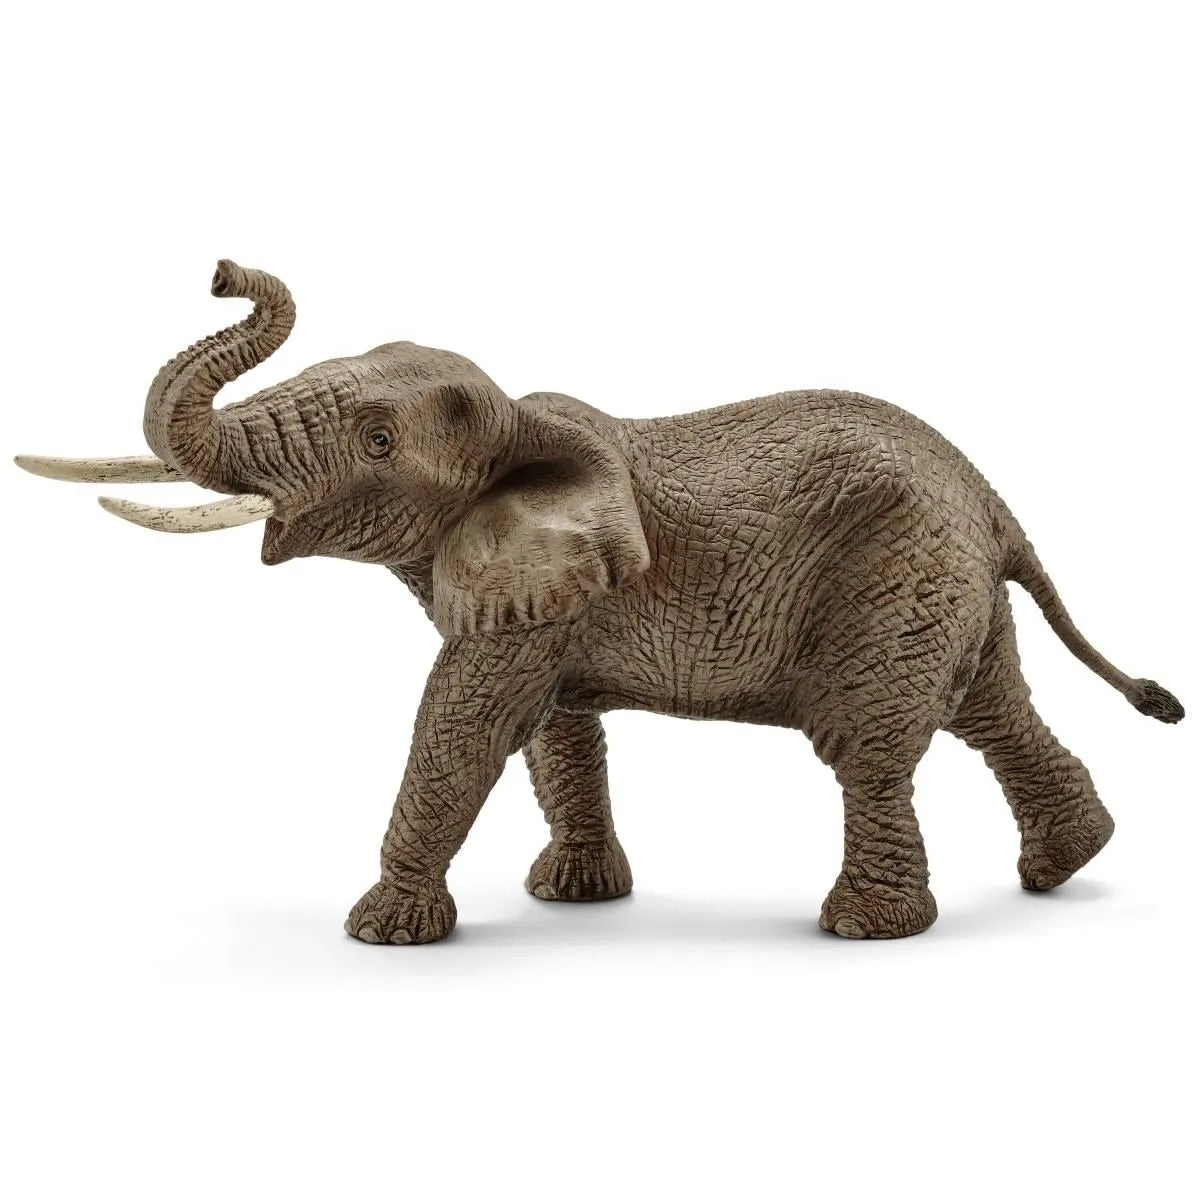 Male African Elephant by Schleich #14762